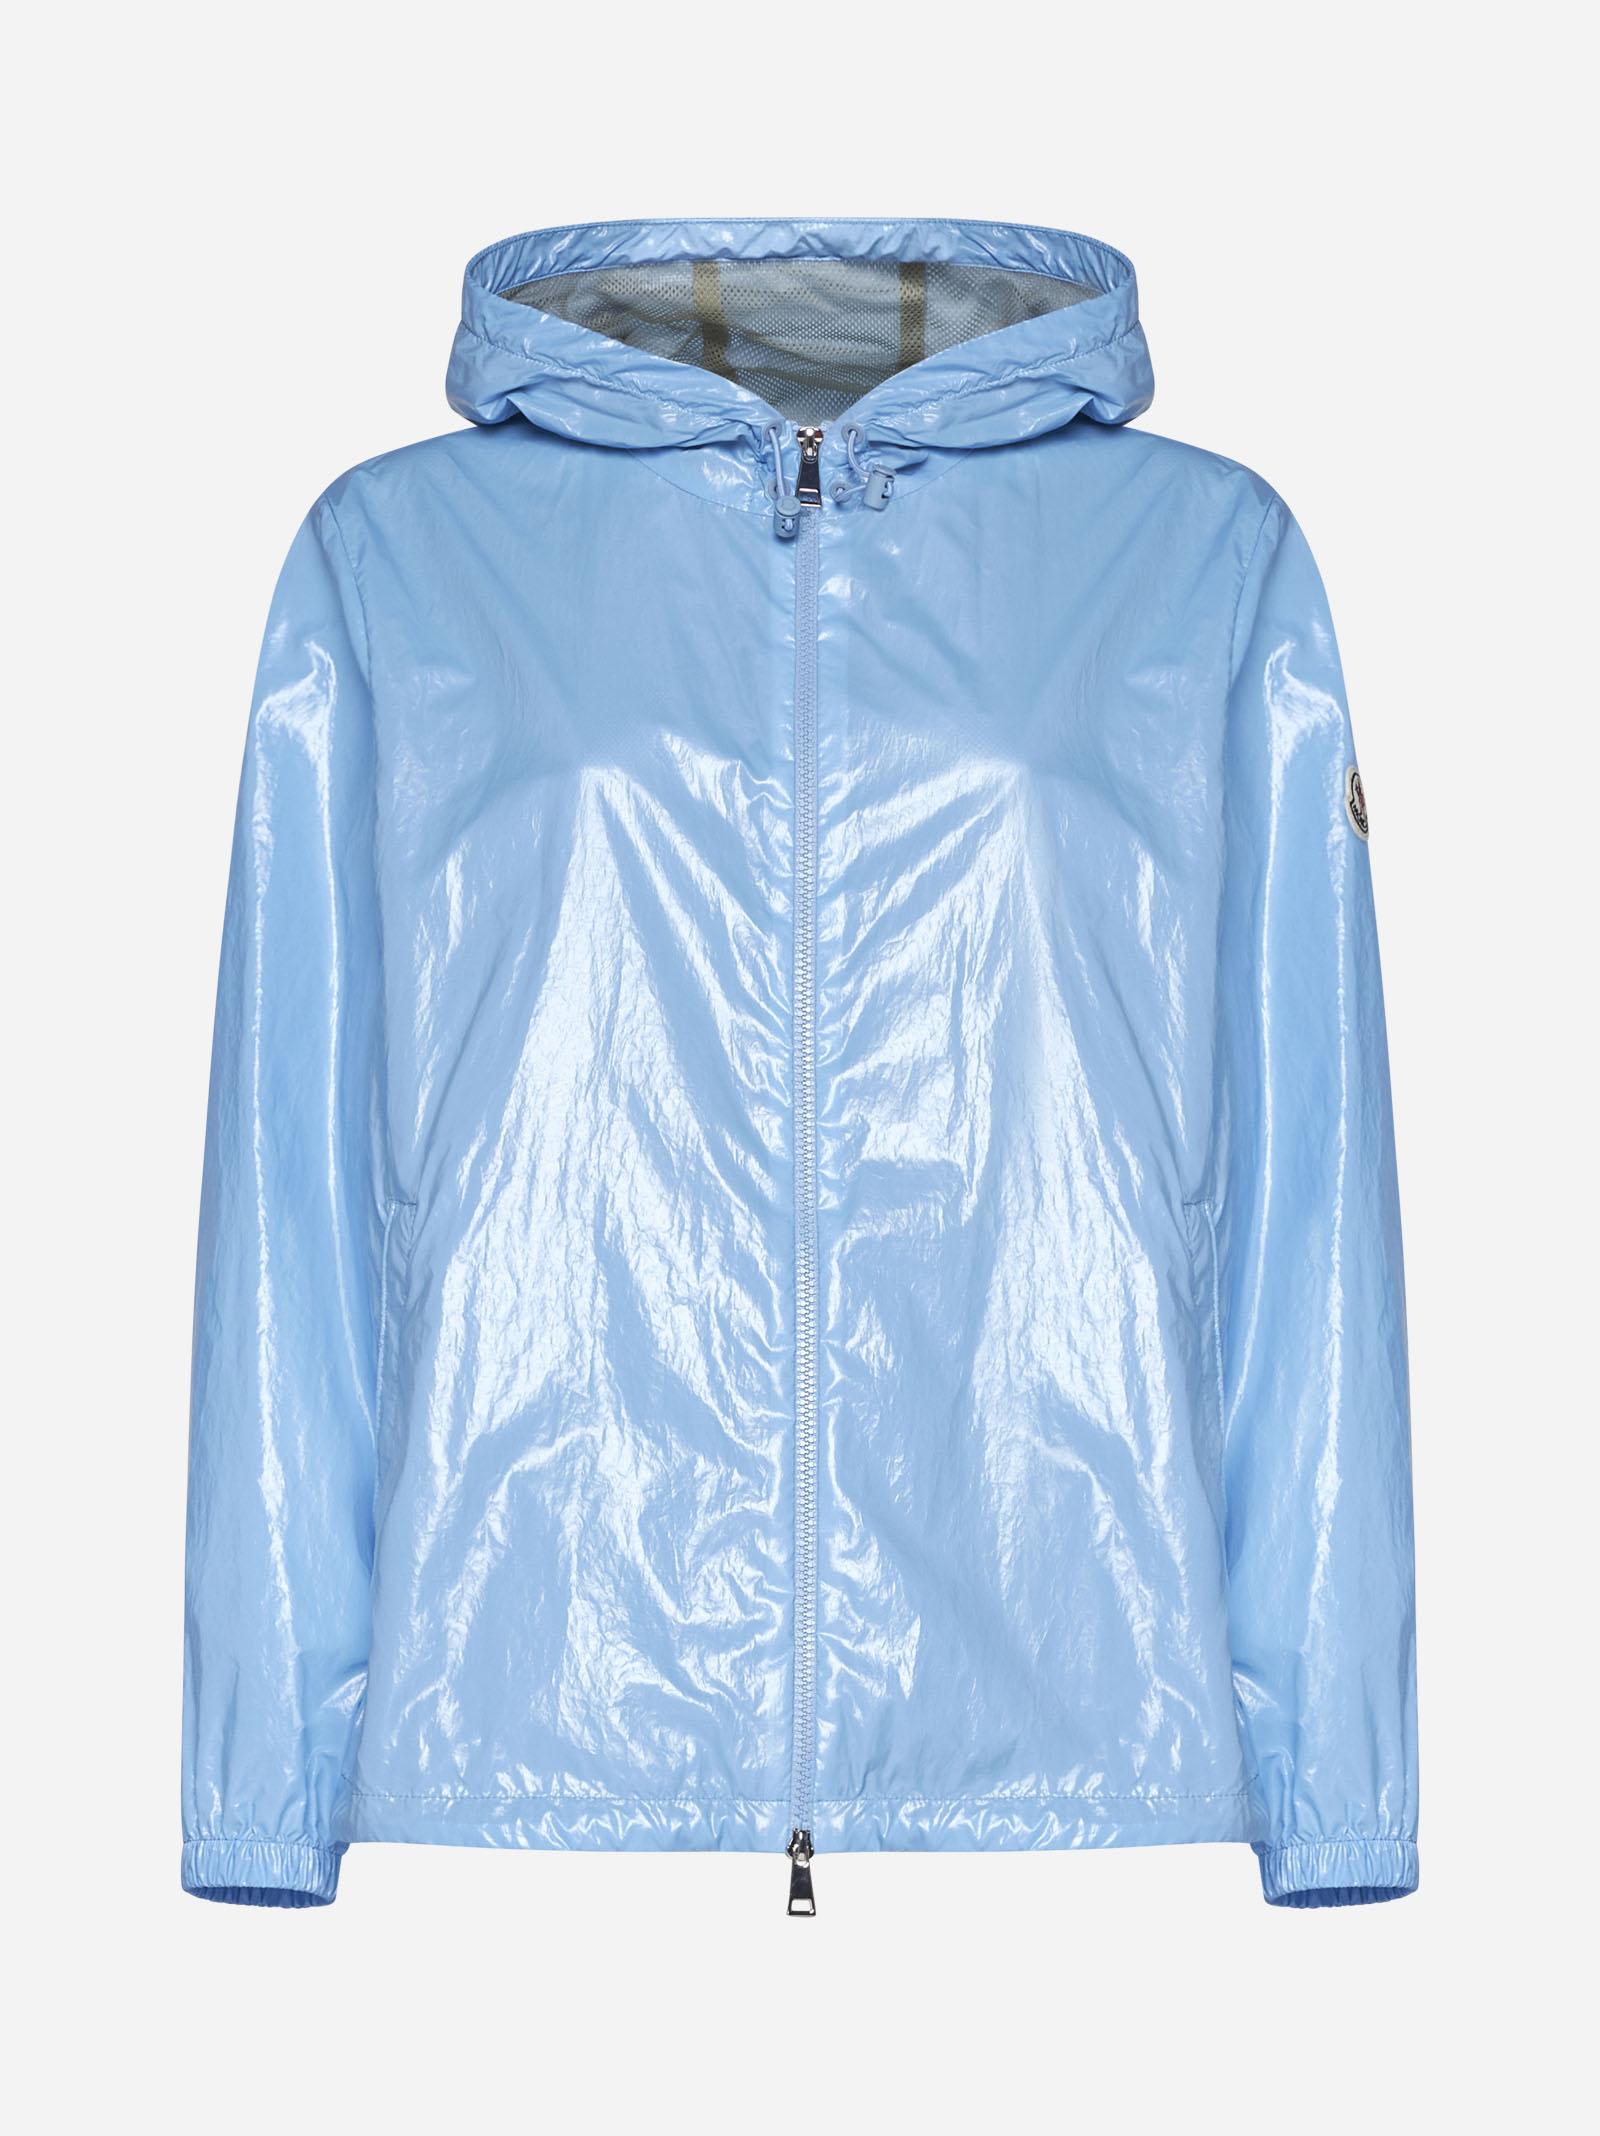 MONCLER WUISSE WAXED COTTON JACKET